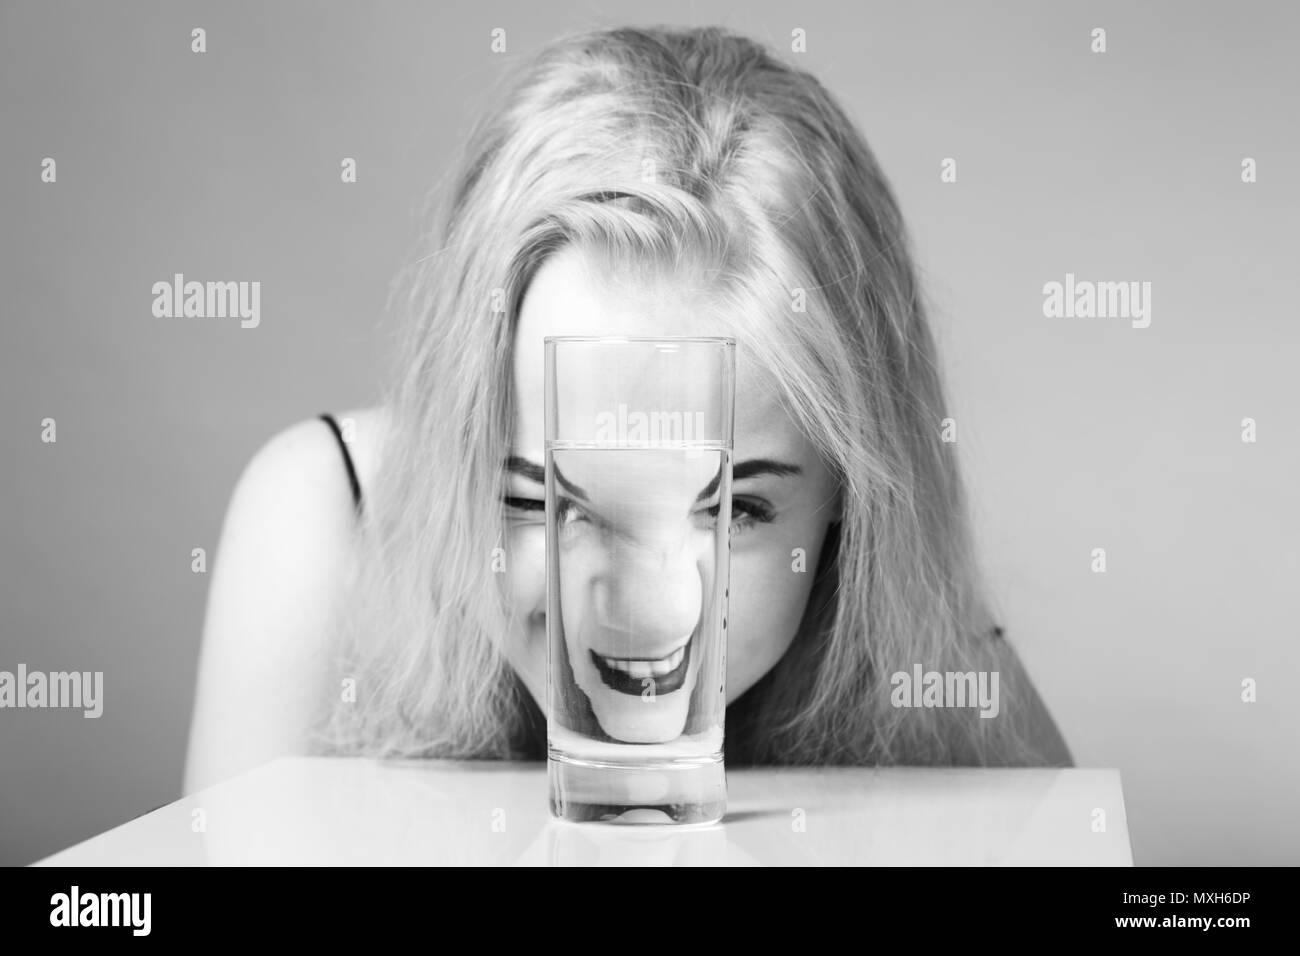 girl looks at camera through glass with water on gray background, laughing, monochrome Stock Photo